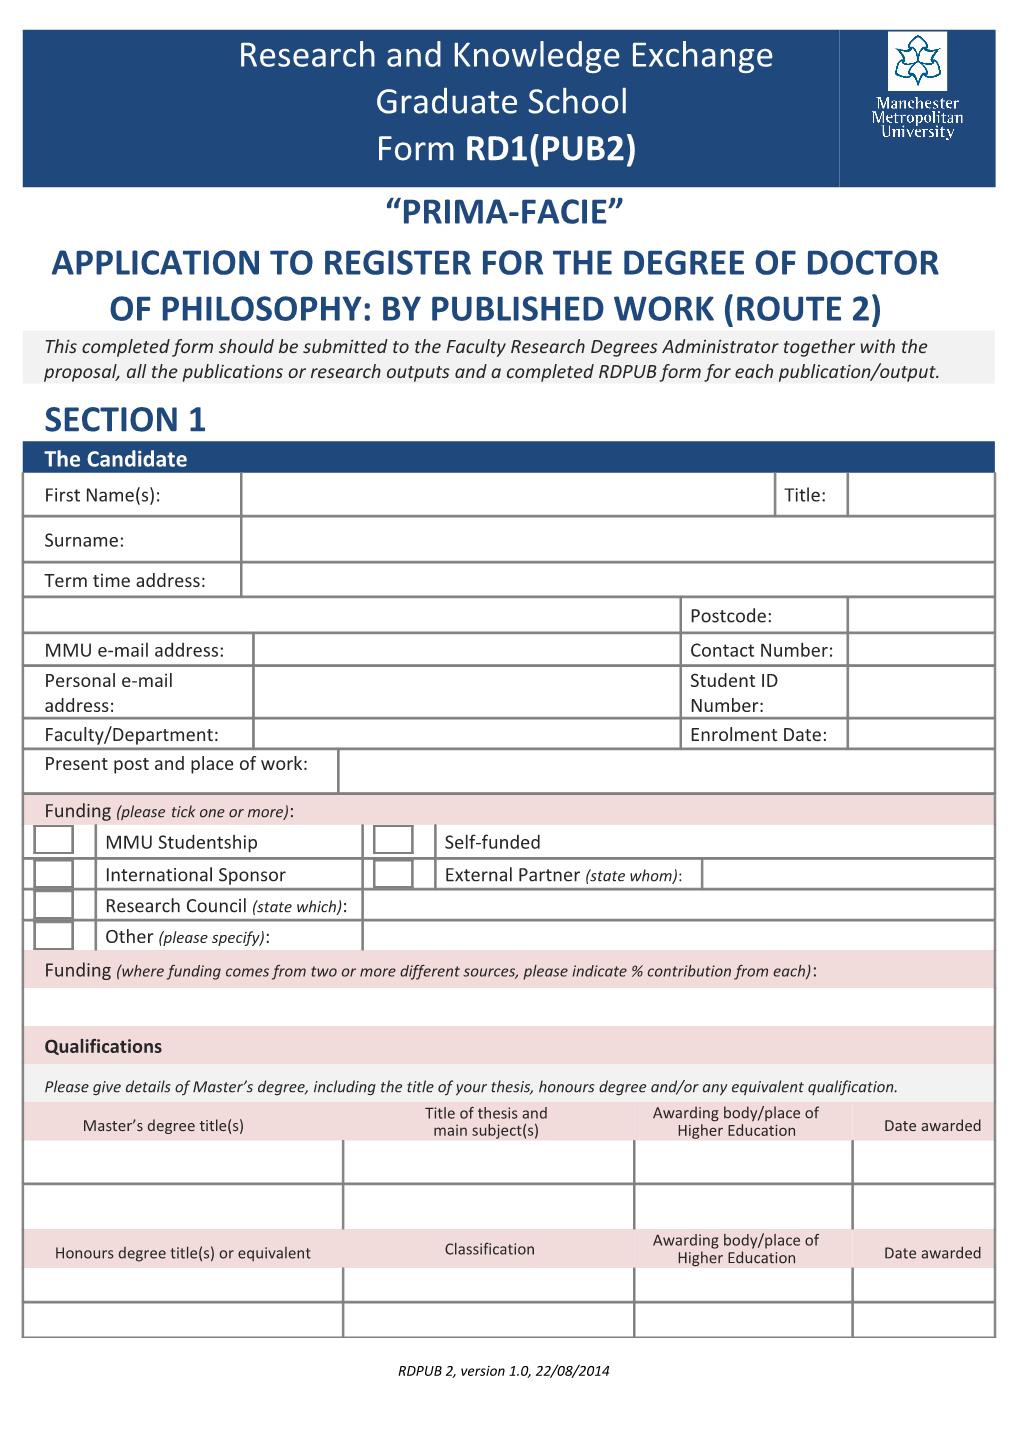 Application to Register for the Degree of Doctor of Philosophy: by Published Work (Route 2)